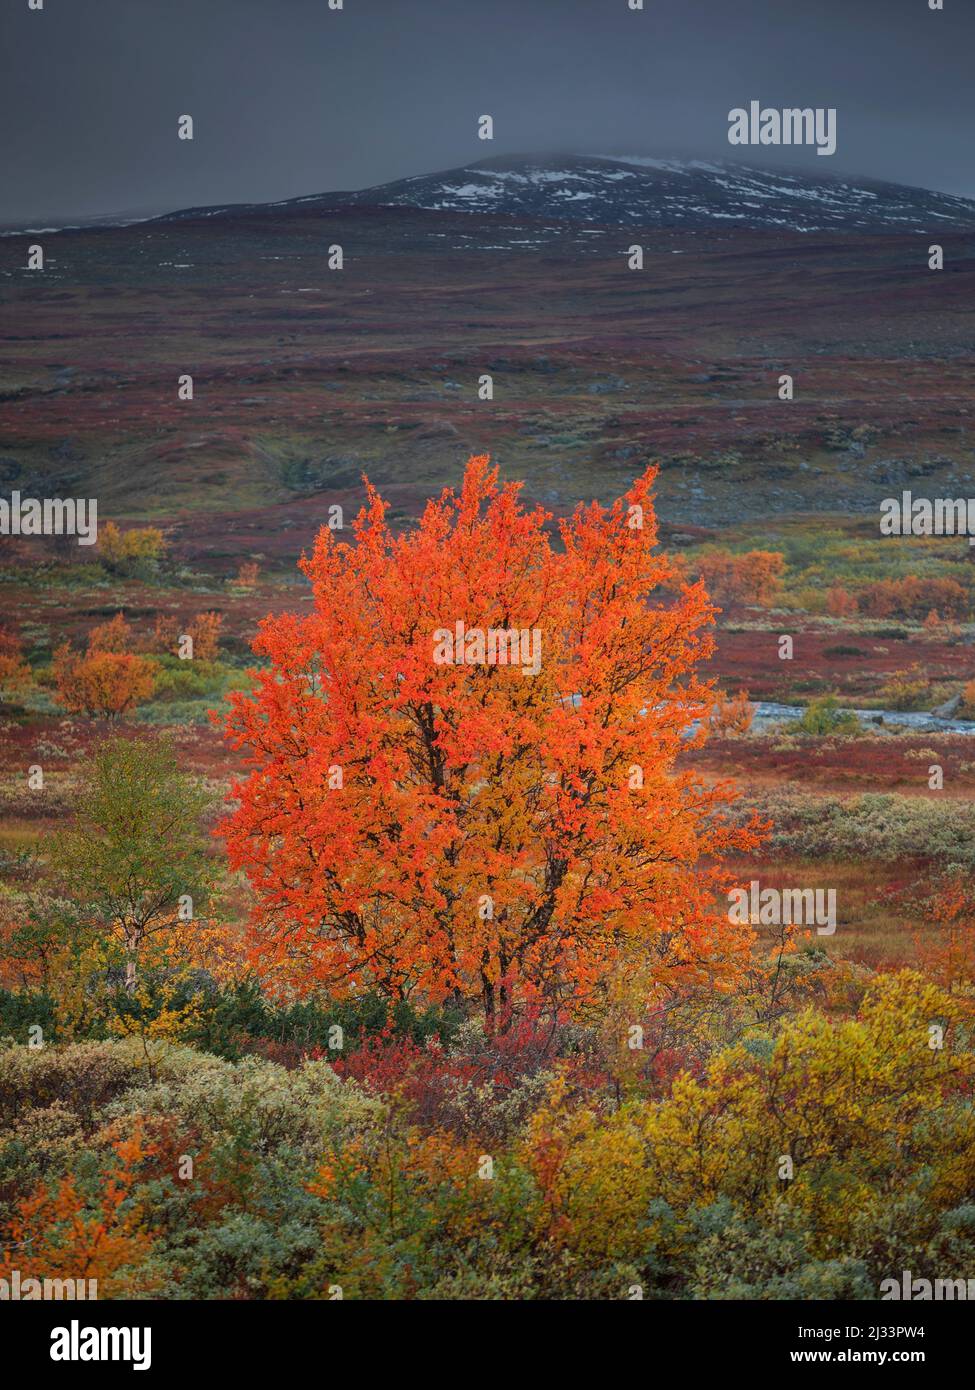 Colorful tree in autumn with snow-covered mountain along the Wilderness Road, on the Vildmarksvagen plateau in Jämtland in Sweden Stock Photo